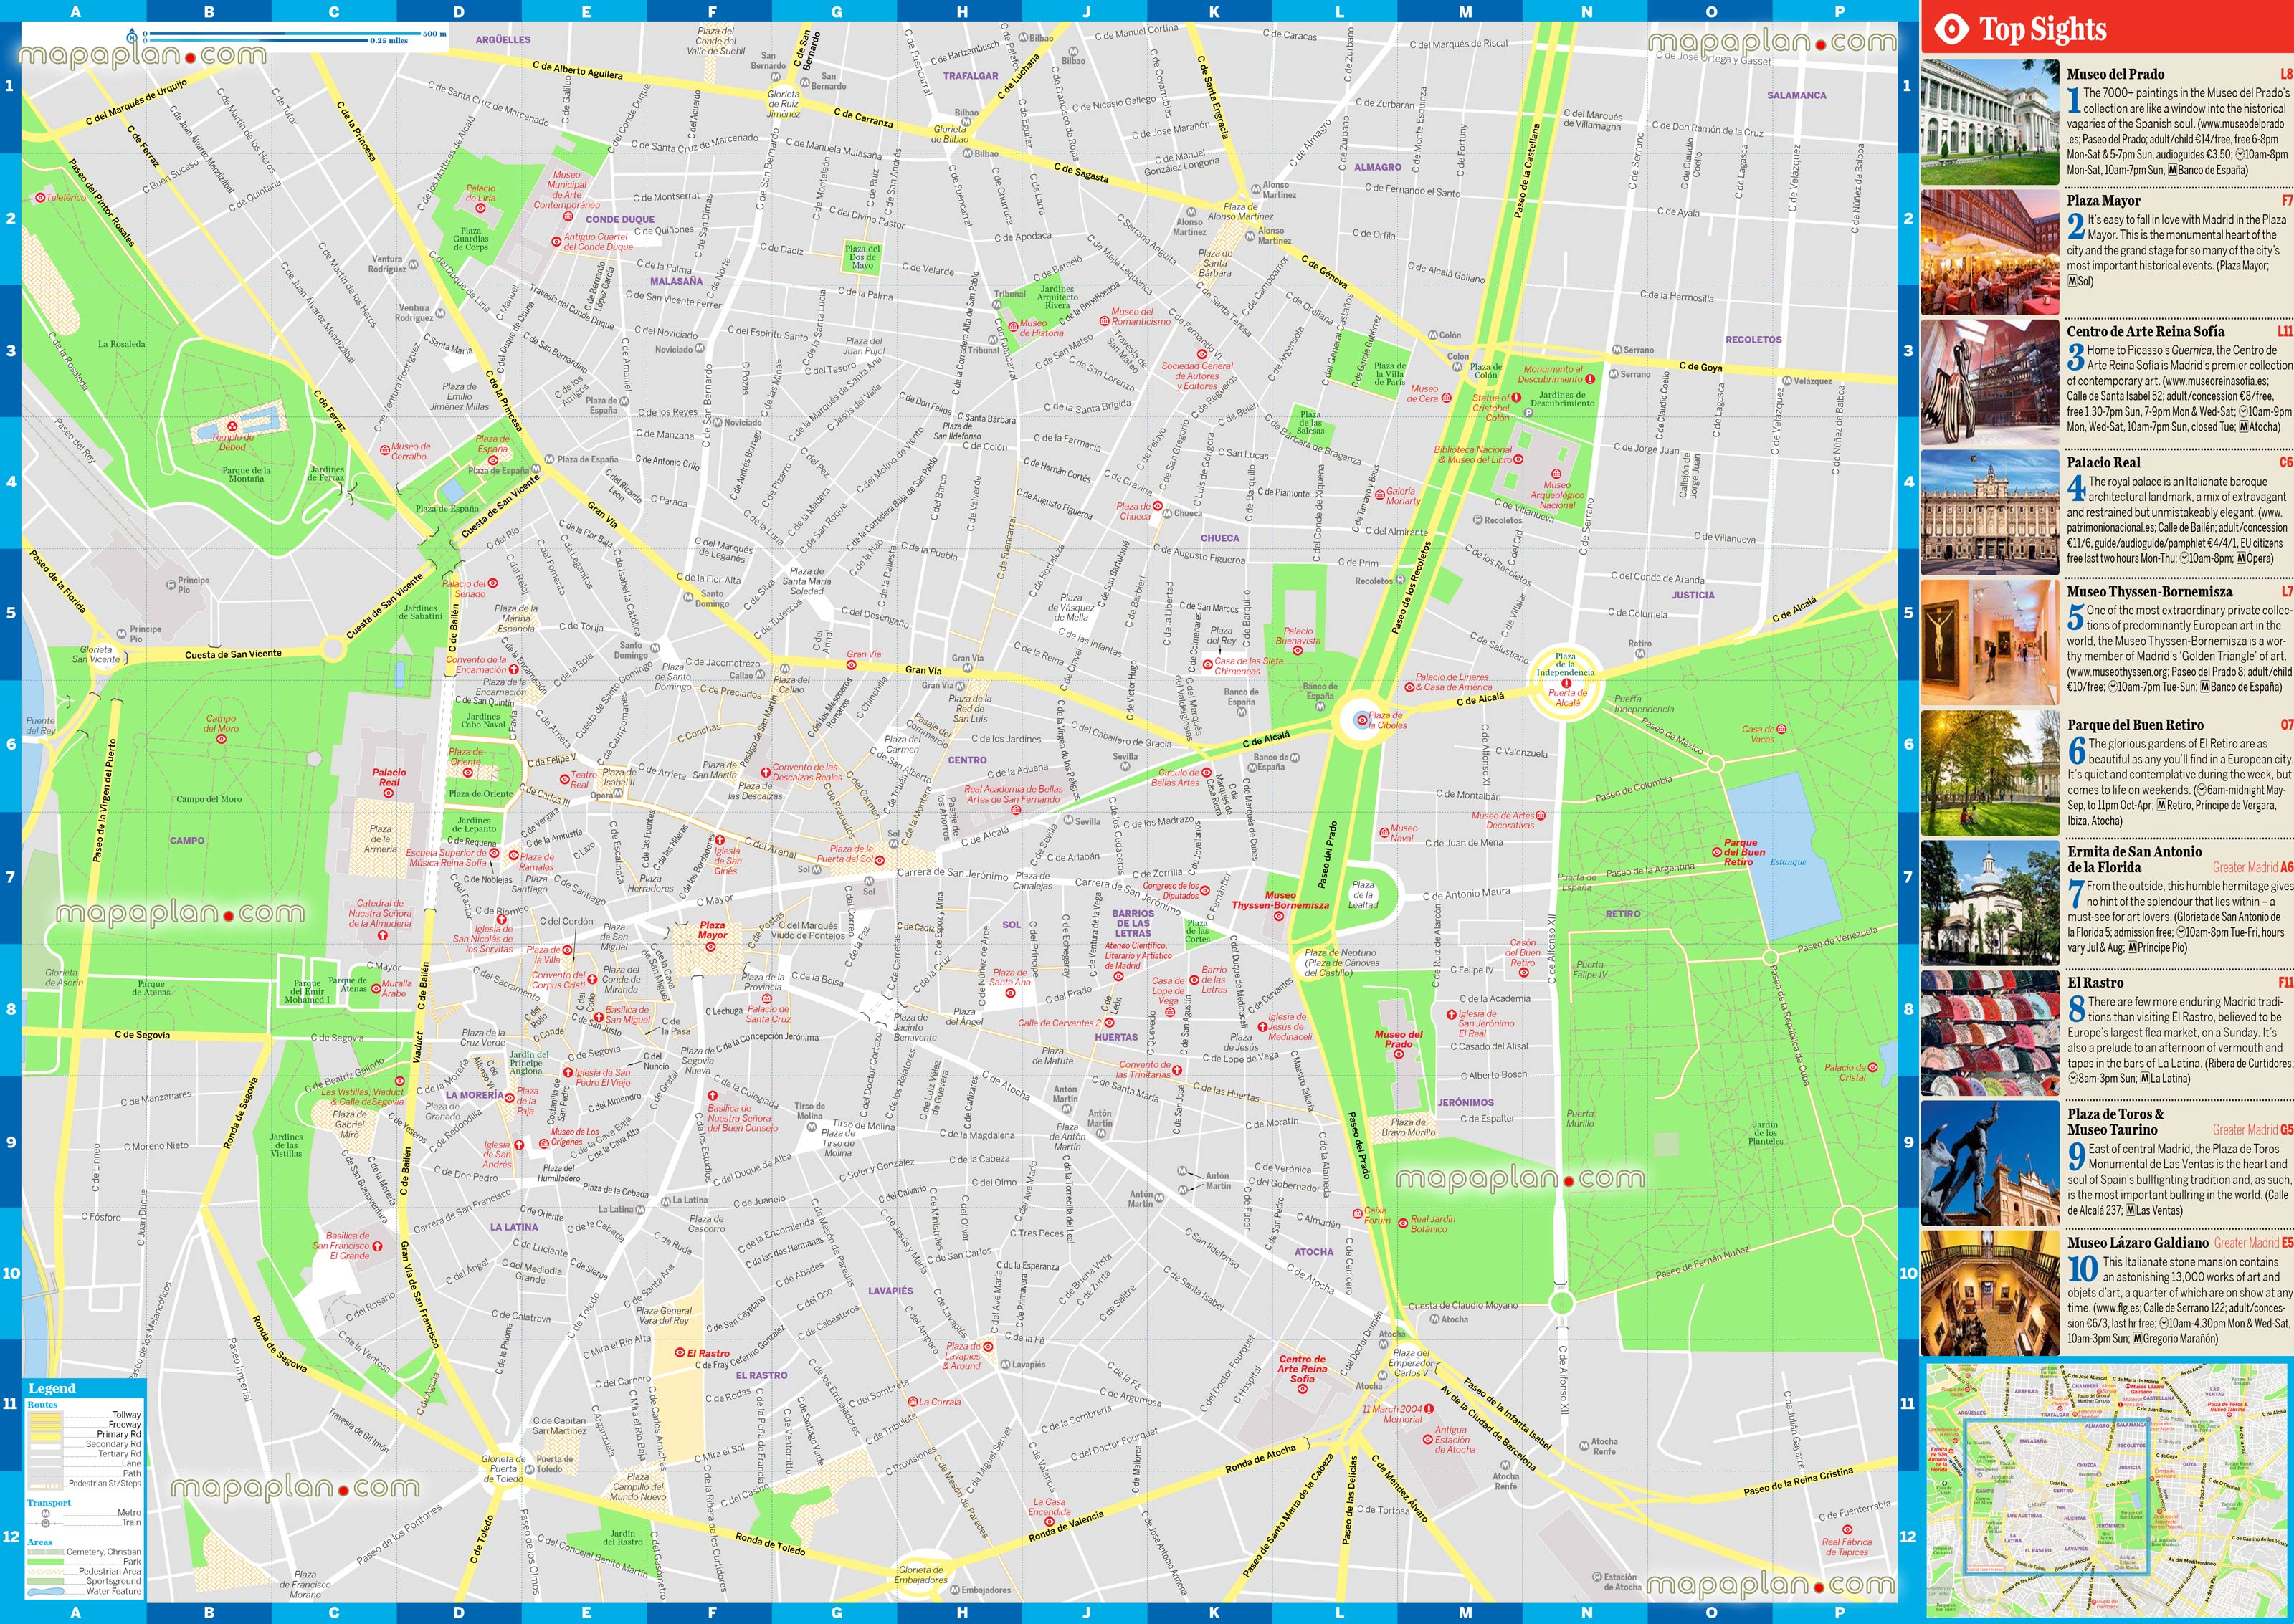 central Madrid spain visitors interactive plan inner city tourist attractions main points interest museums landmarks chueca paseo del prado parque del buen retiros Madrid Top tourist attractions map